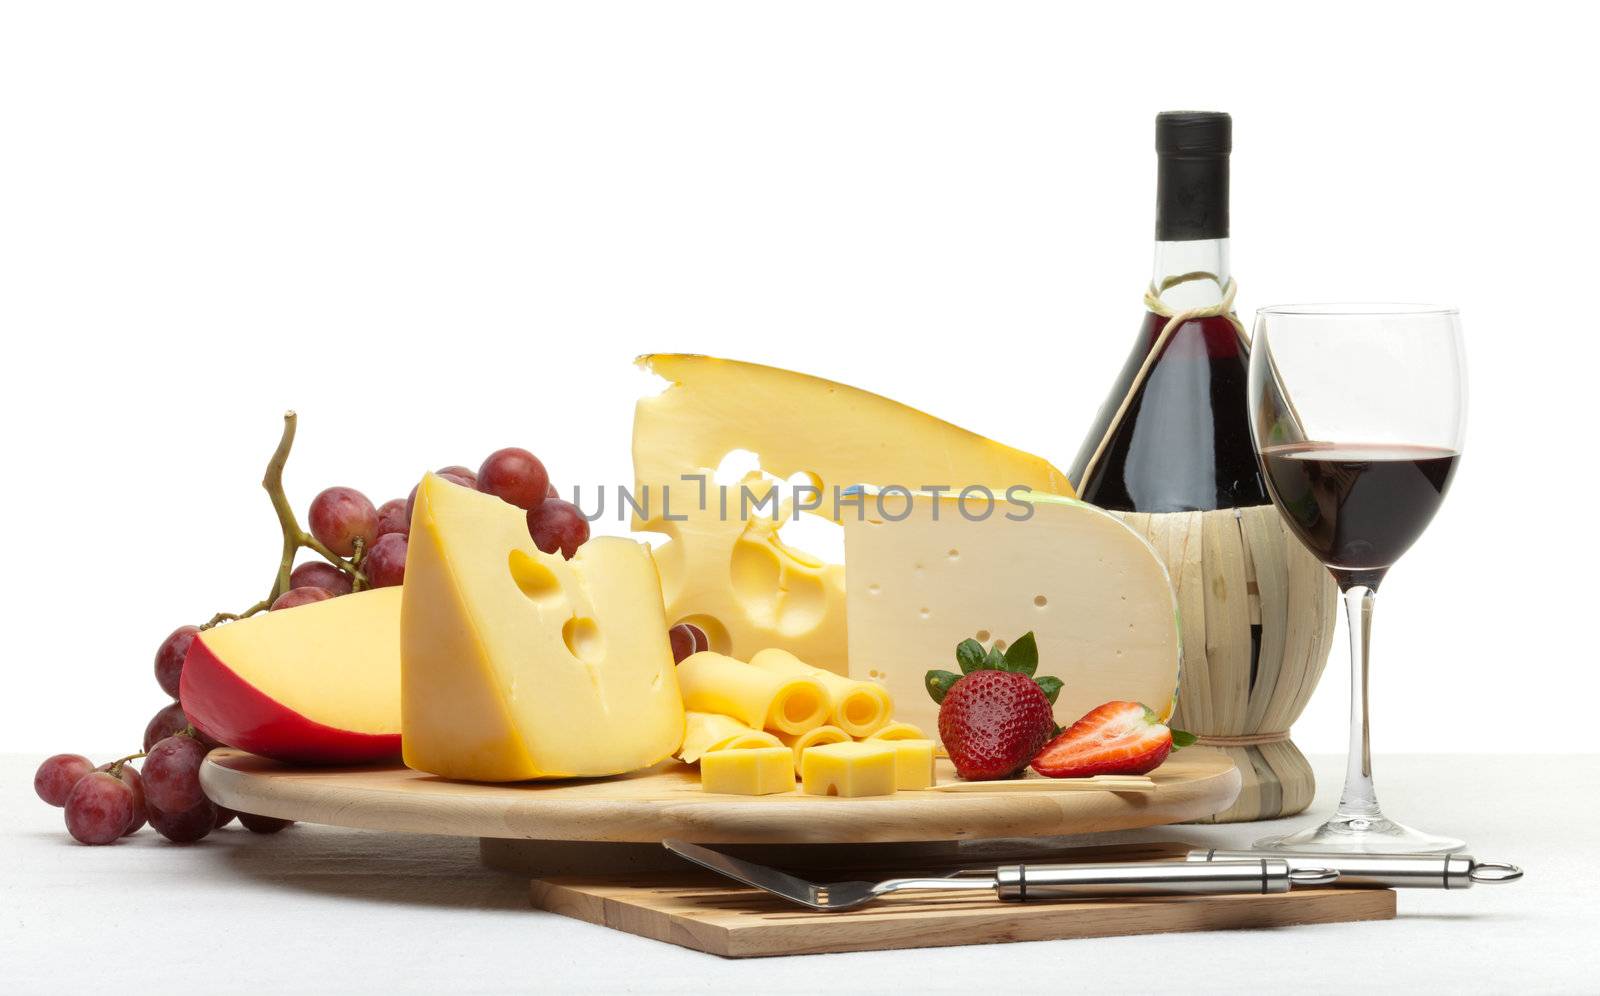 Composition of cheese, grapes, bottles and glasses of wine and strawberries on a wooden round tray on a white tablecloth, isolated on a white background